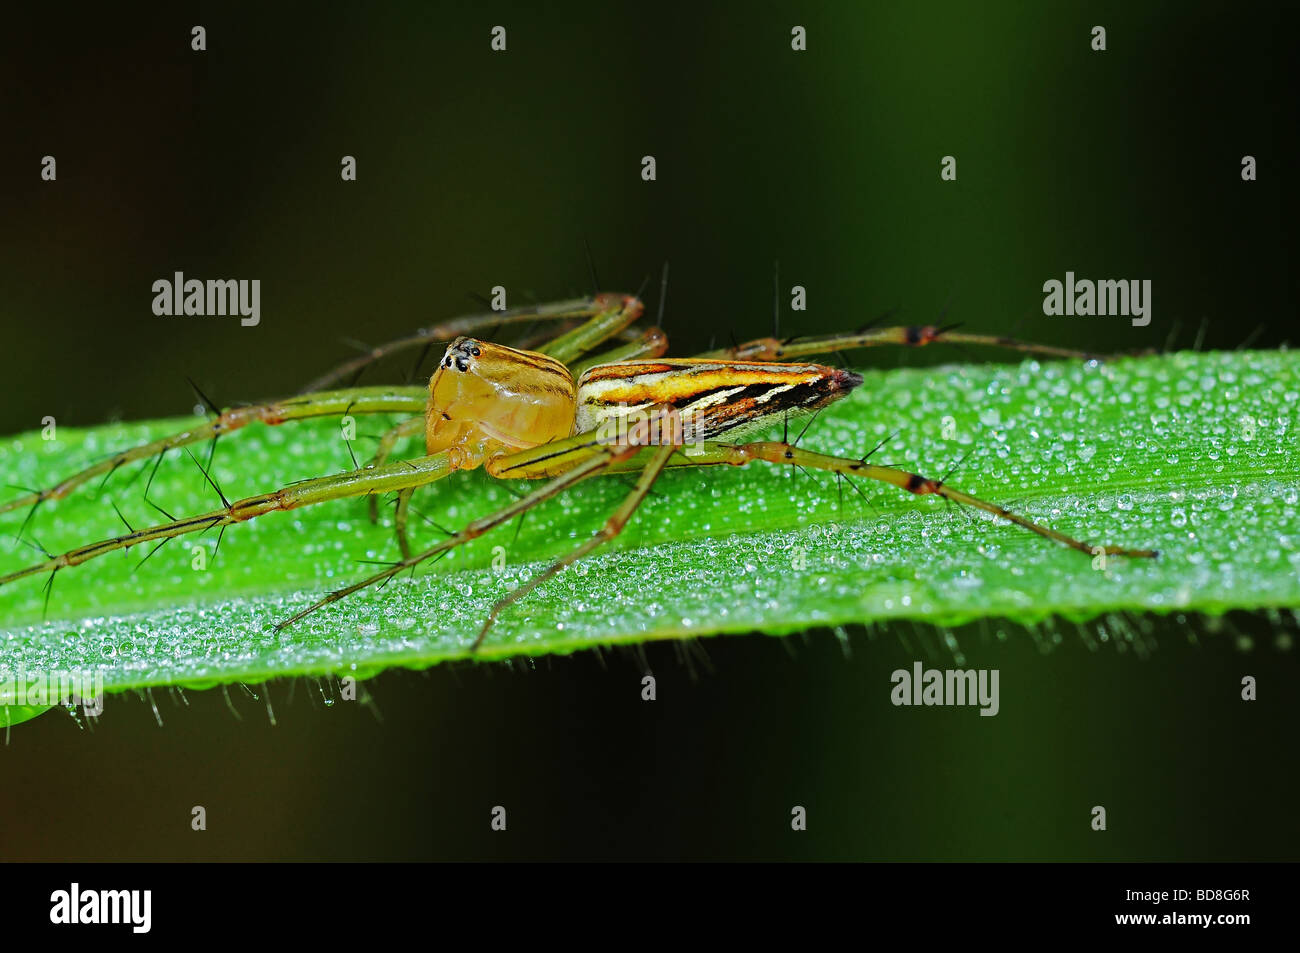 lynx spider in the parks Stock Photo